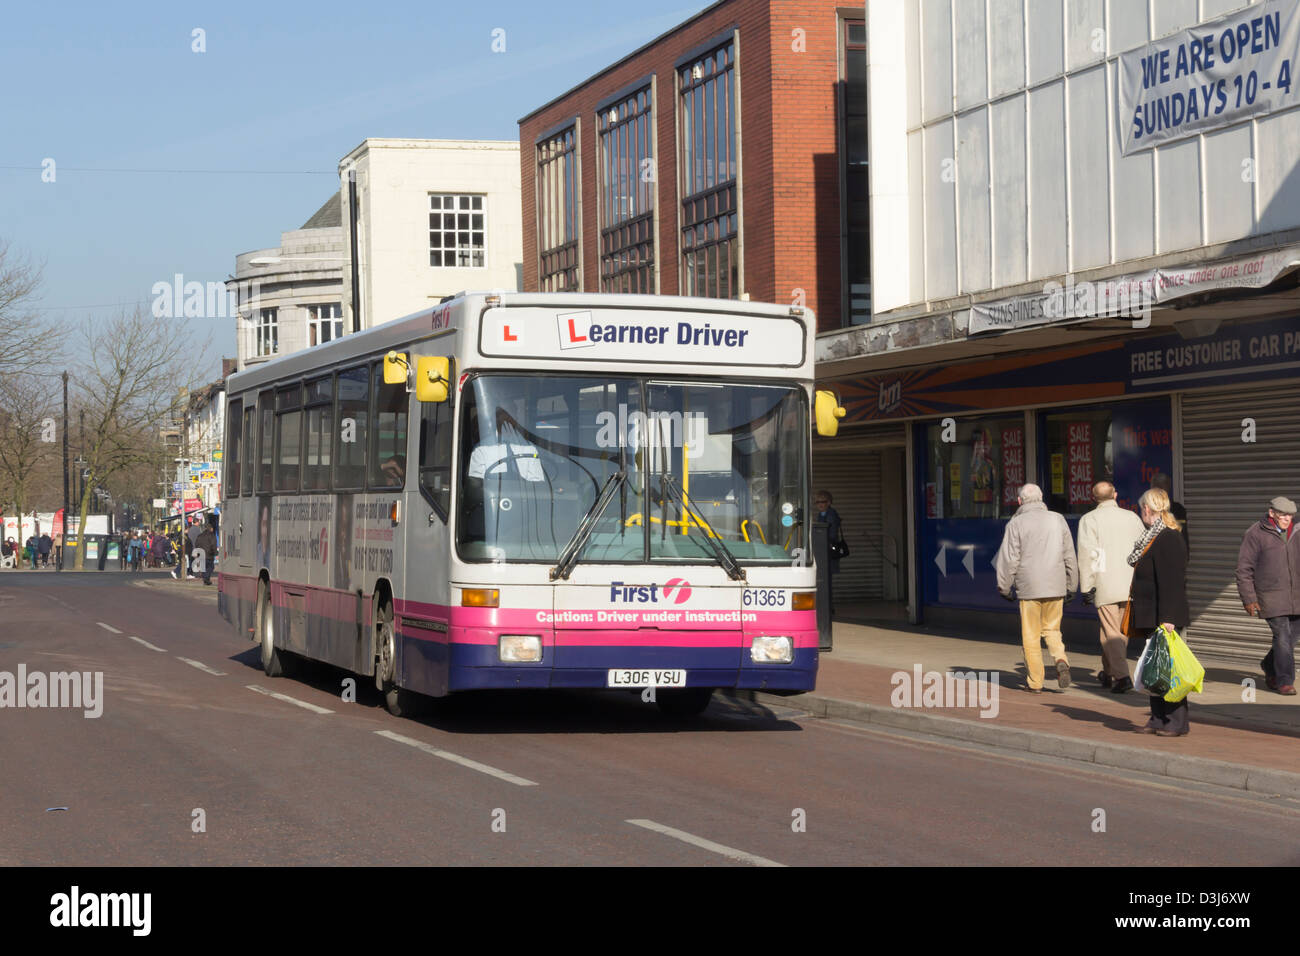 A learner driver single decker bus belonging to First Greater Manchester's bus fleet  on Newport Street in Bolton. Stock Photo